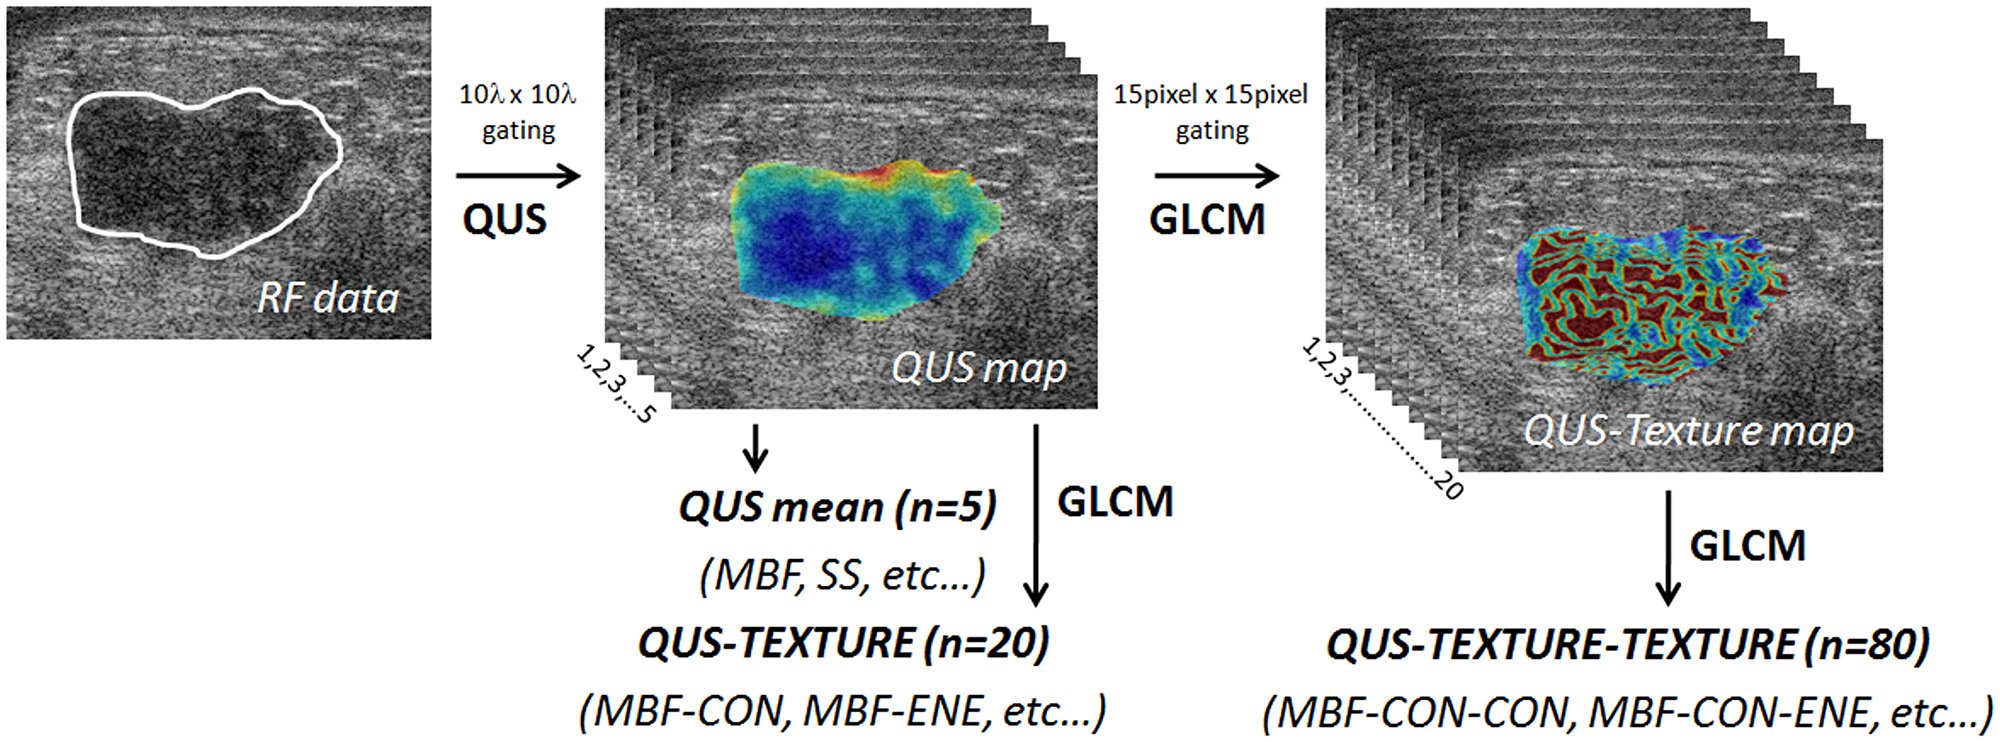 Figure 4: Generation of parametric and texture maps from radiofrequency data.